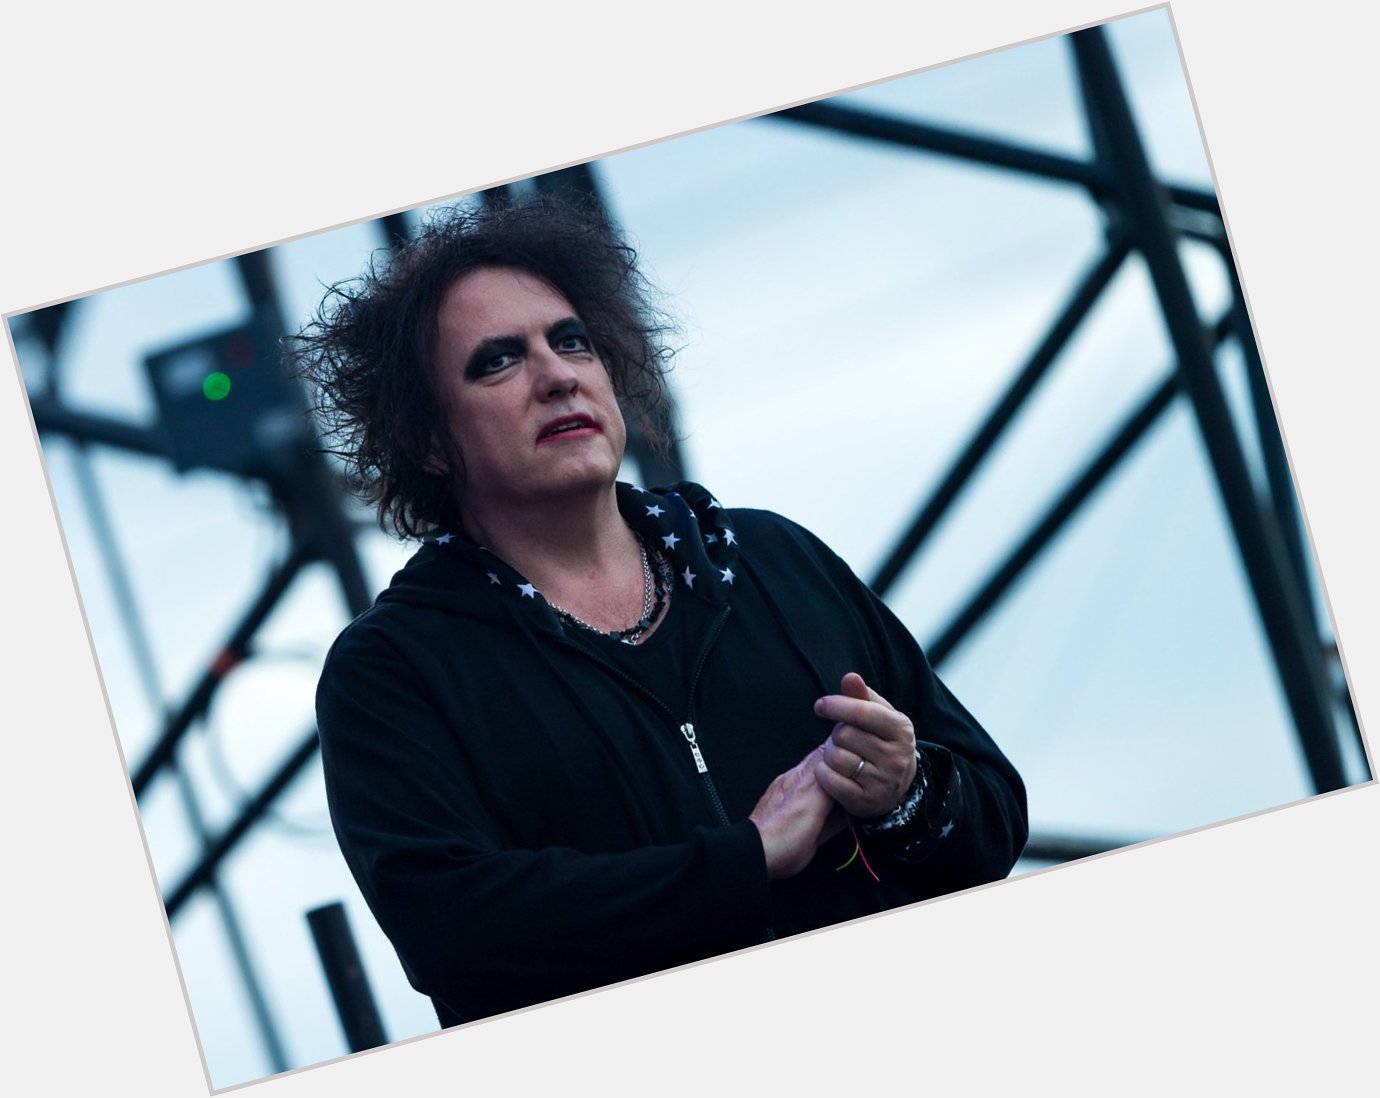 Happy 63 birthday to the amazing The Cure guitarist and singer Robert Smith! 